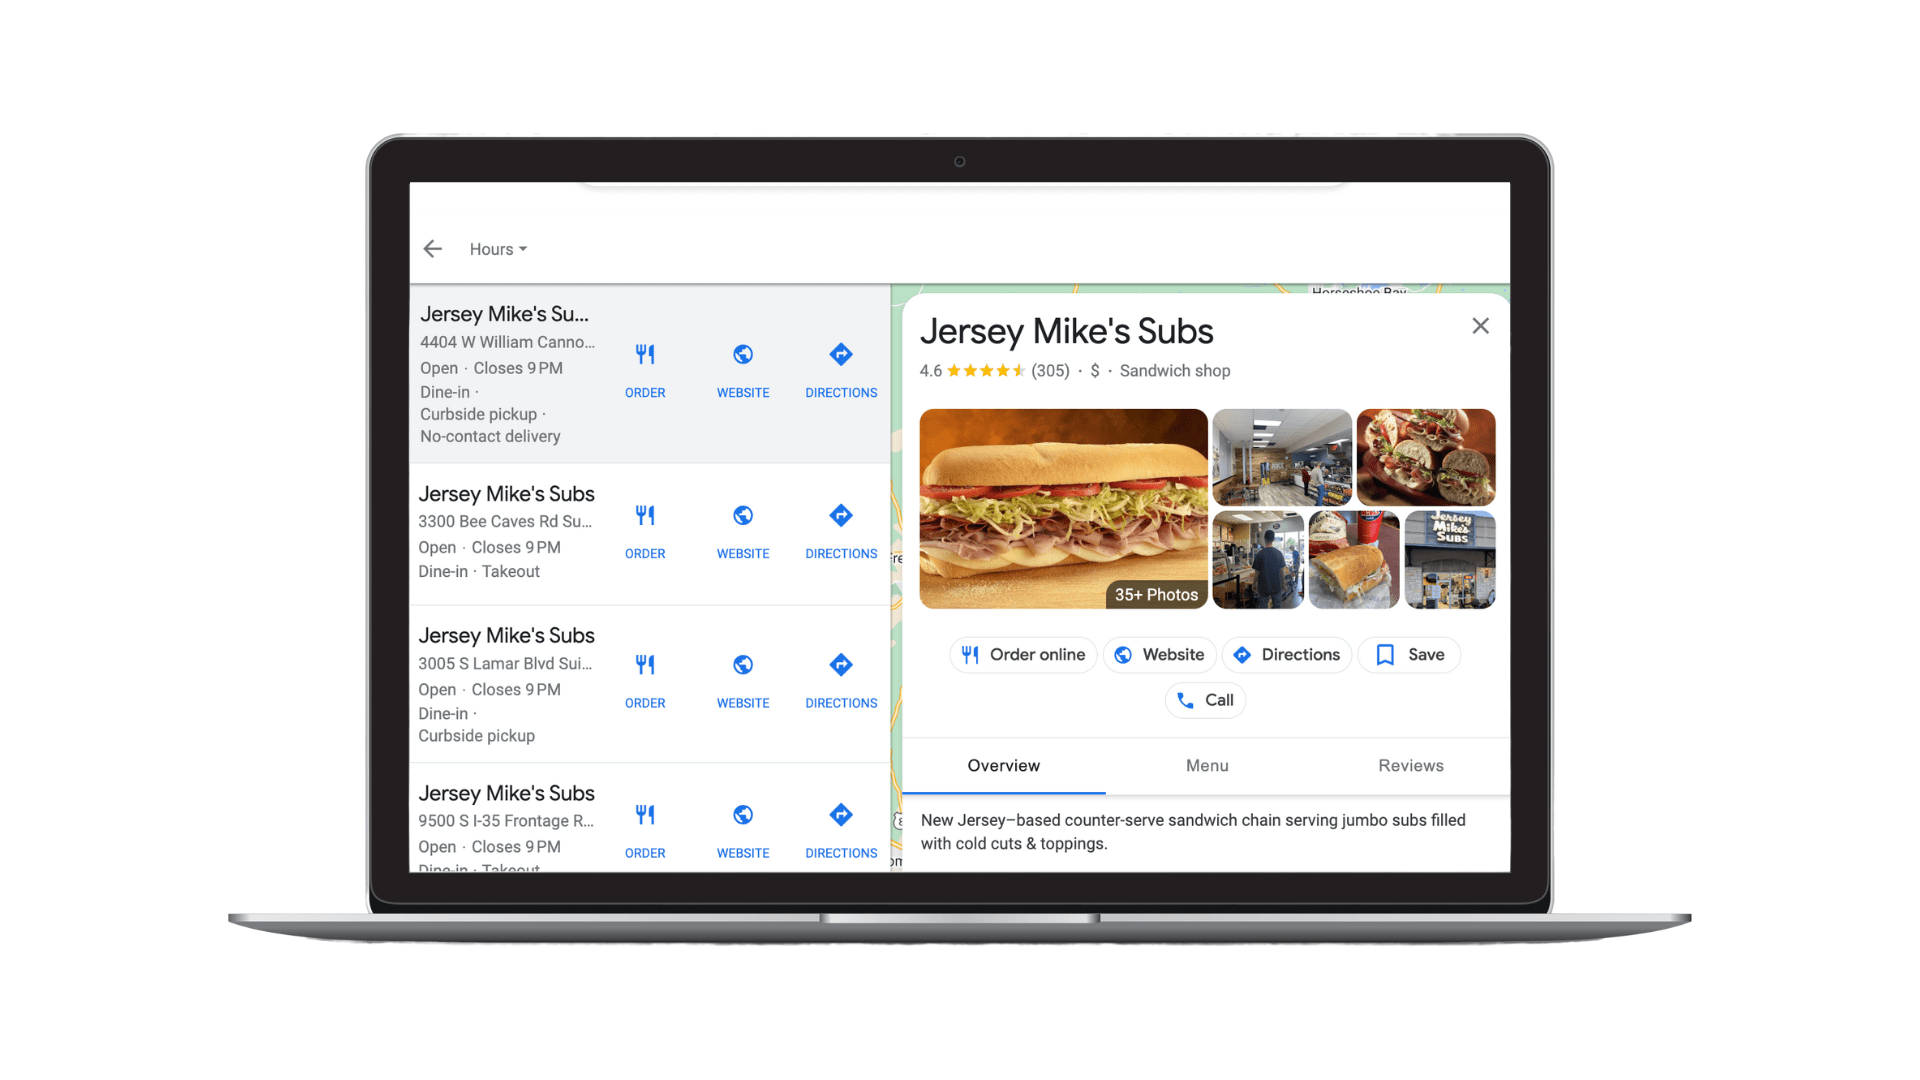 An image of a local listing on Google Business Profile for Jersey Mike's Subs that includes photos of the business location and business information